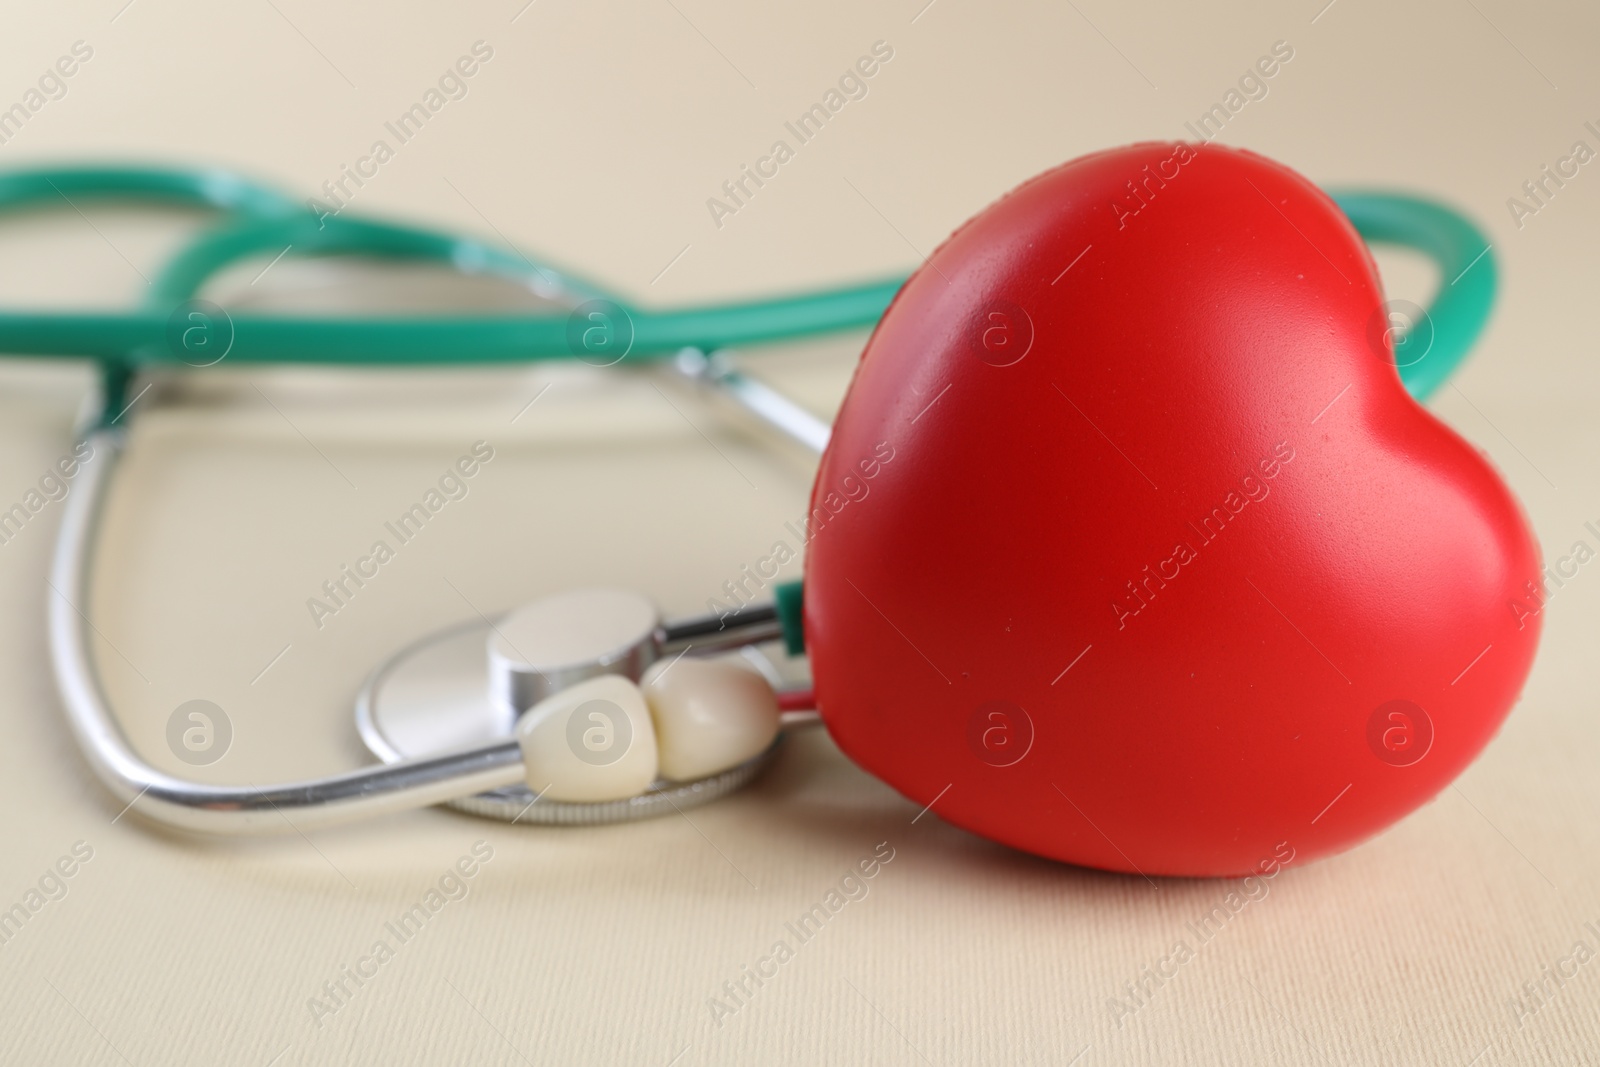 Photo of Stethoscope and red heart on beige background, closeup